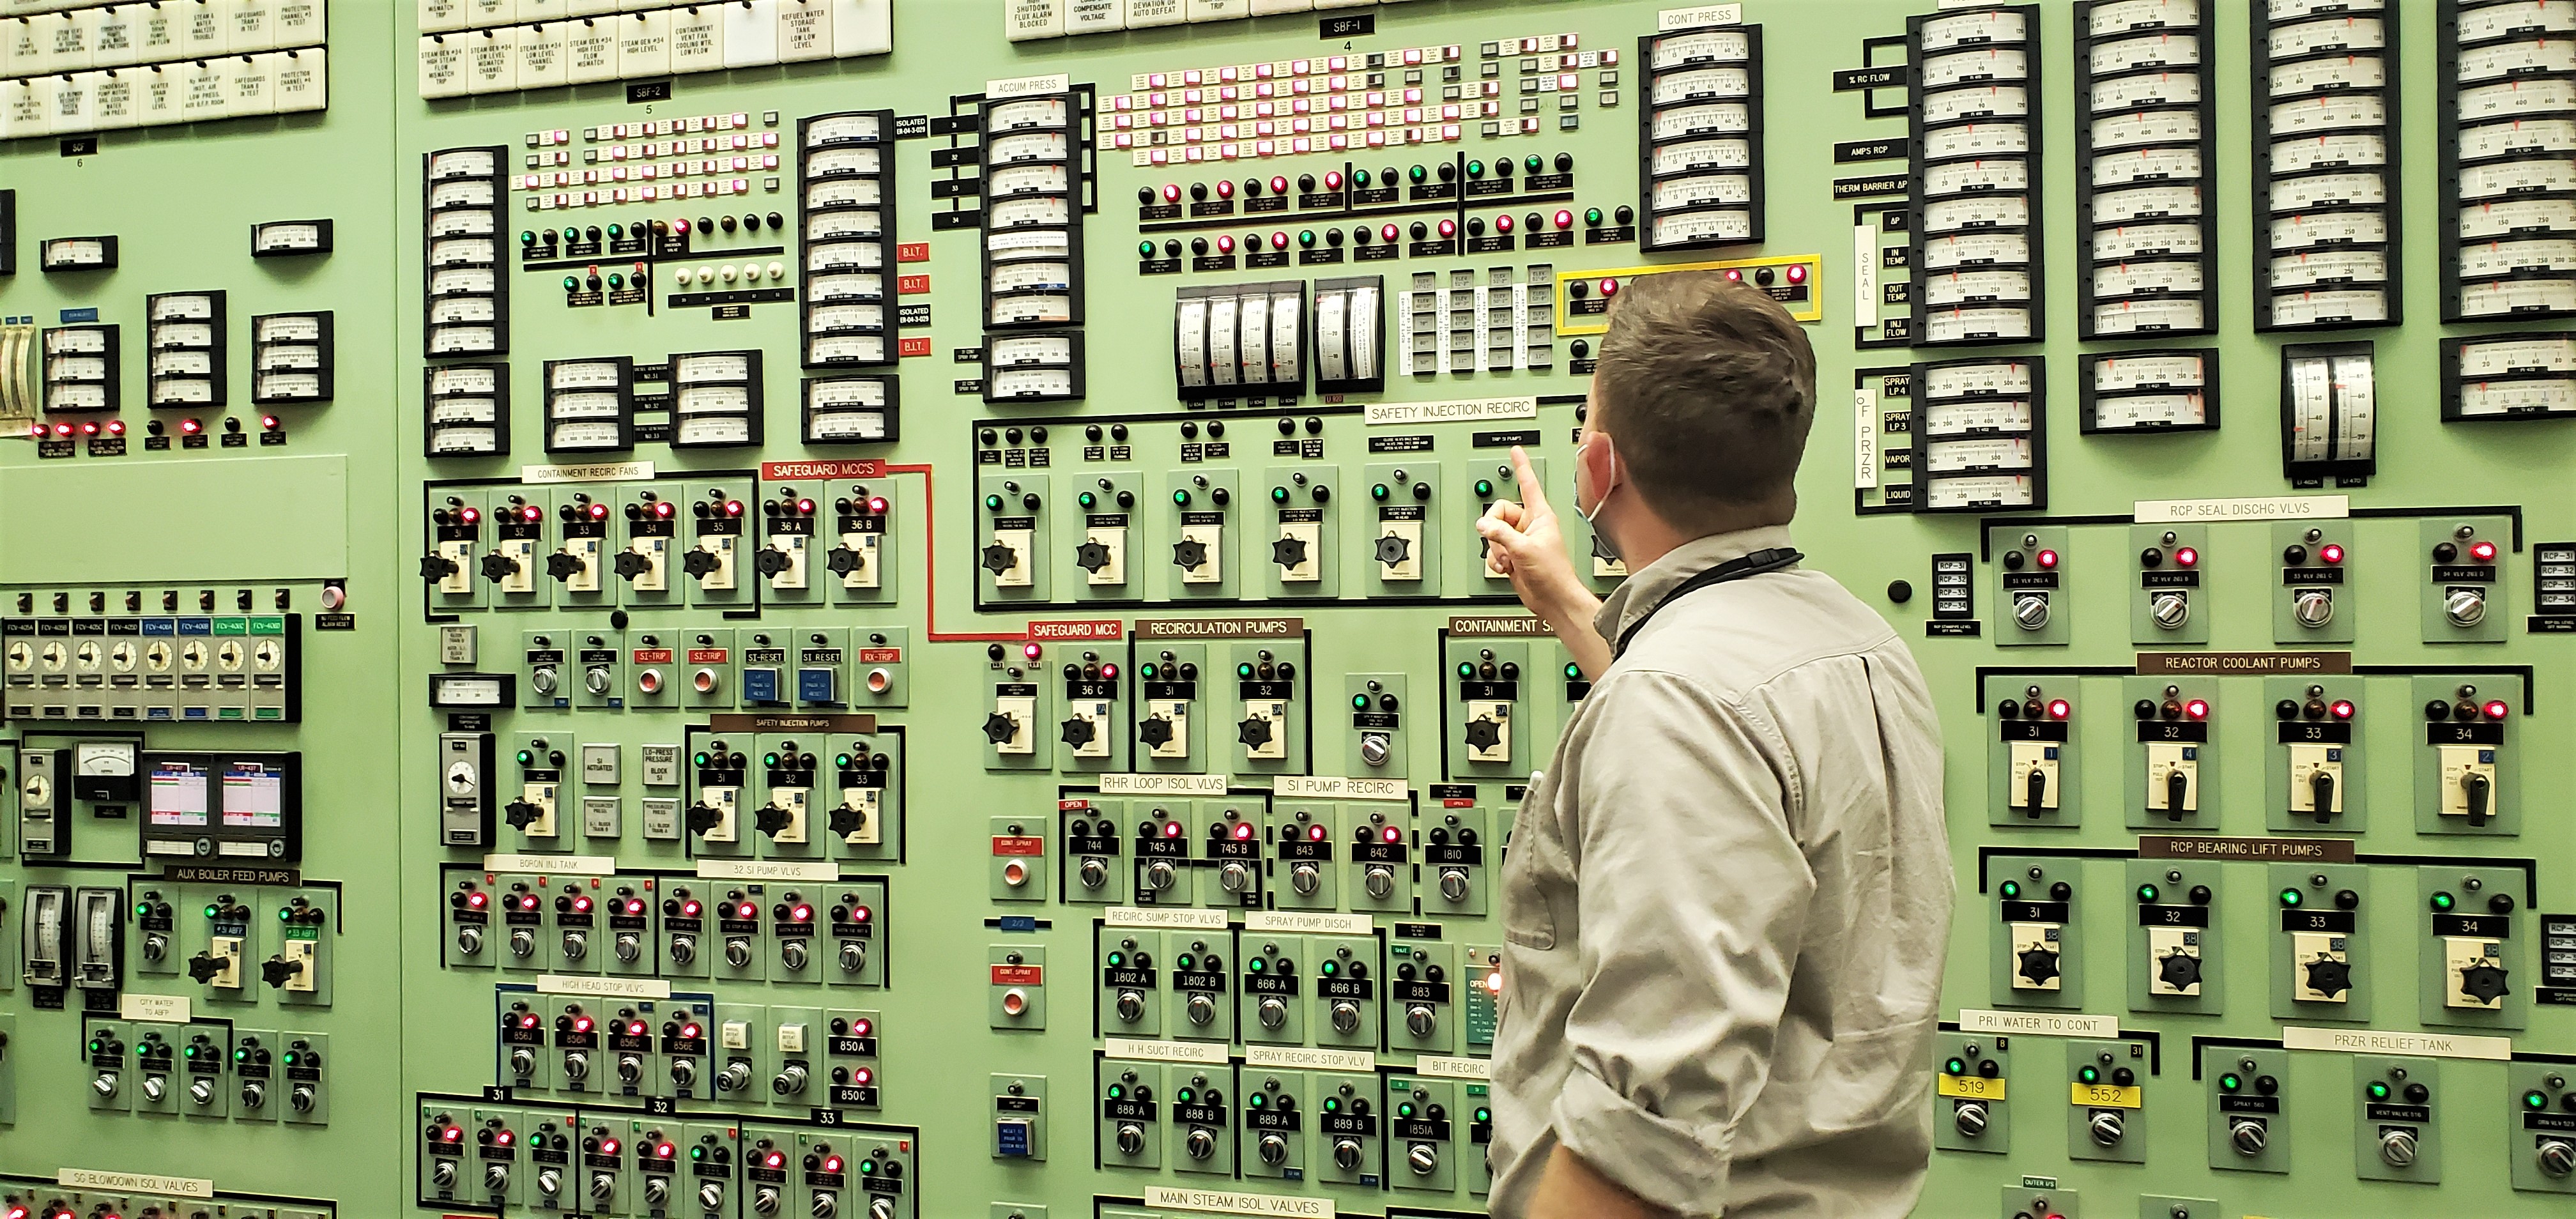 NRC on Twitter: "Resident Inspector Eben Allen was #OntheJob recently checking a simulator control panel, a replica of the plant's control room, during an emergency planning drill at the Indian Point #